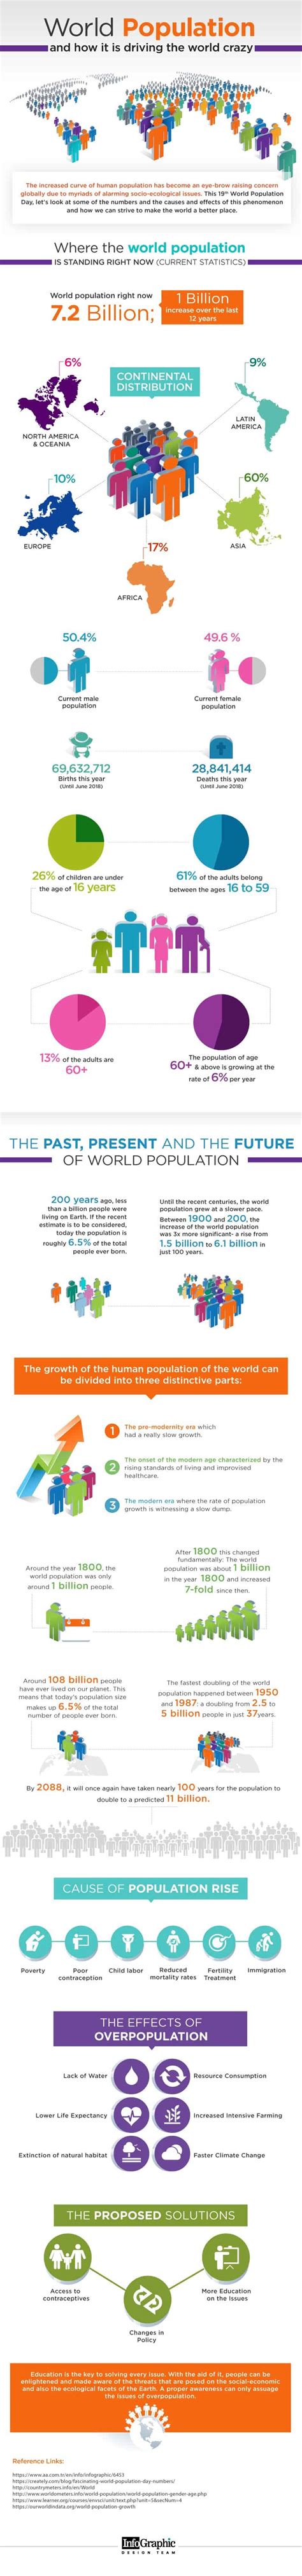 Why World Population Growth Matters Daily Infographic